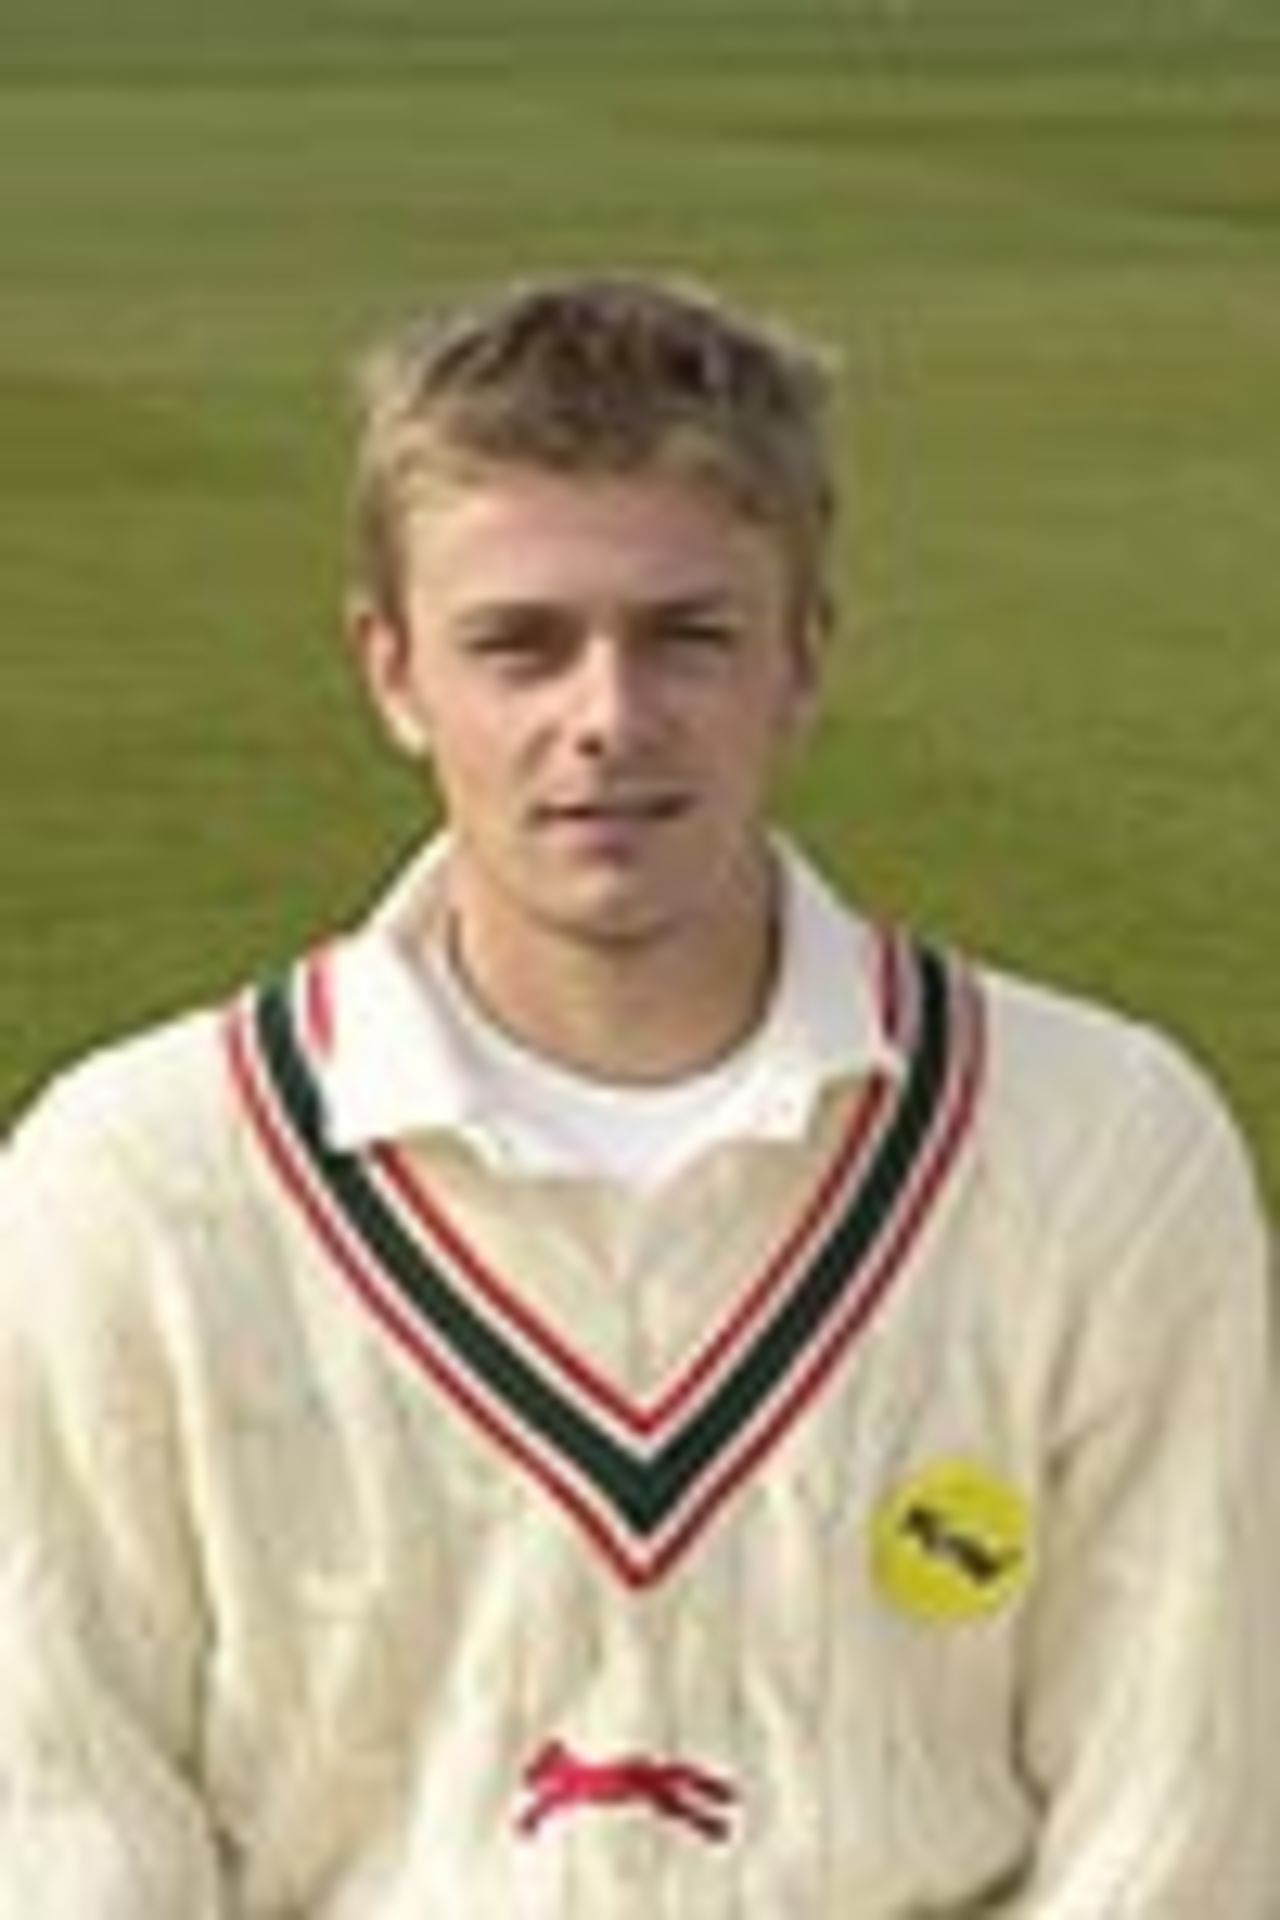 Taken at the 2002 Leicestershire CCC photocall